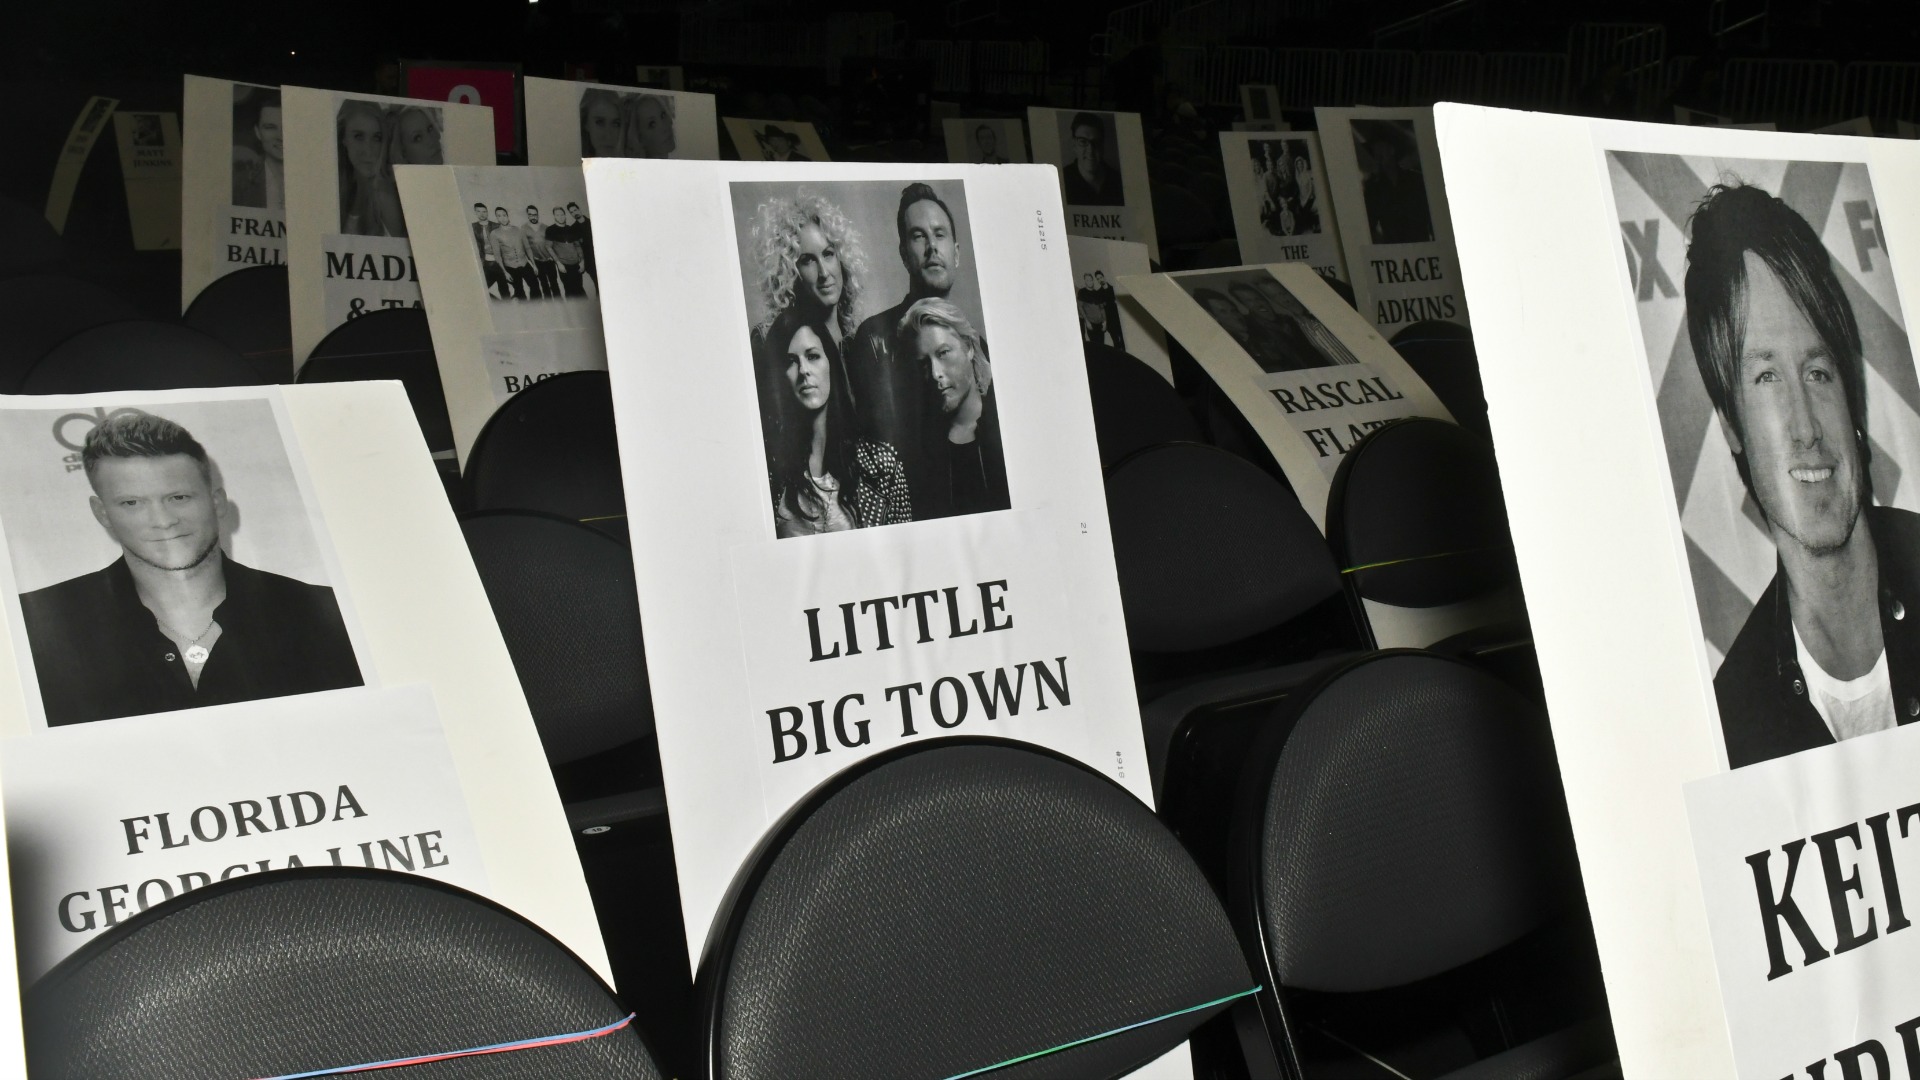 Florida Georgia Line is sitting next to Little Big Town? That's going to be one heck of a party!